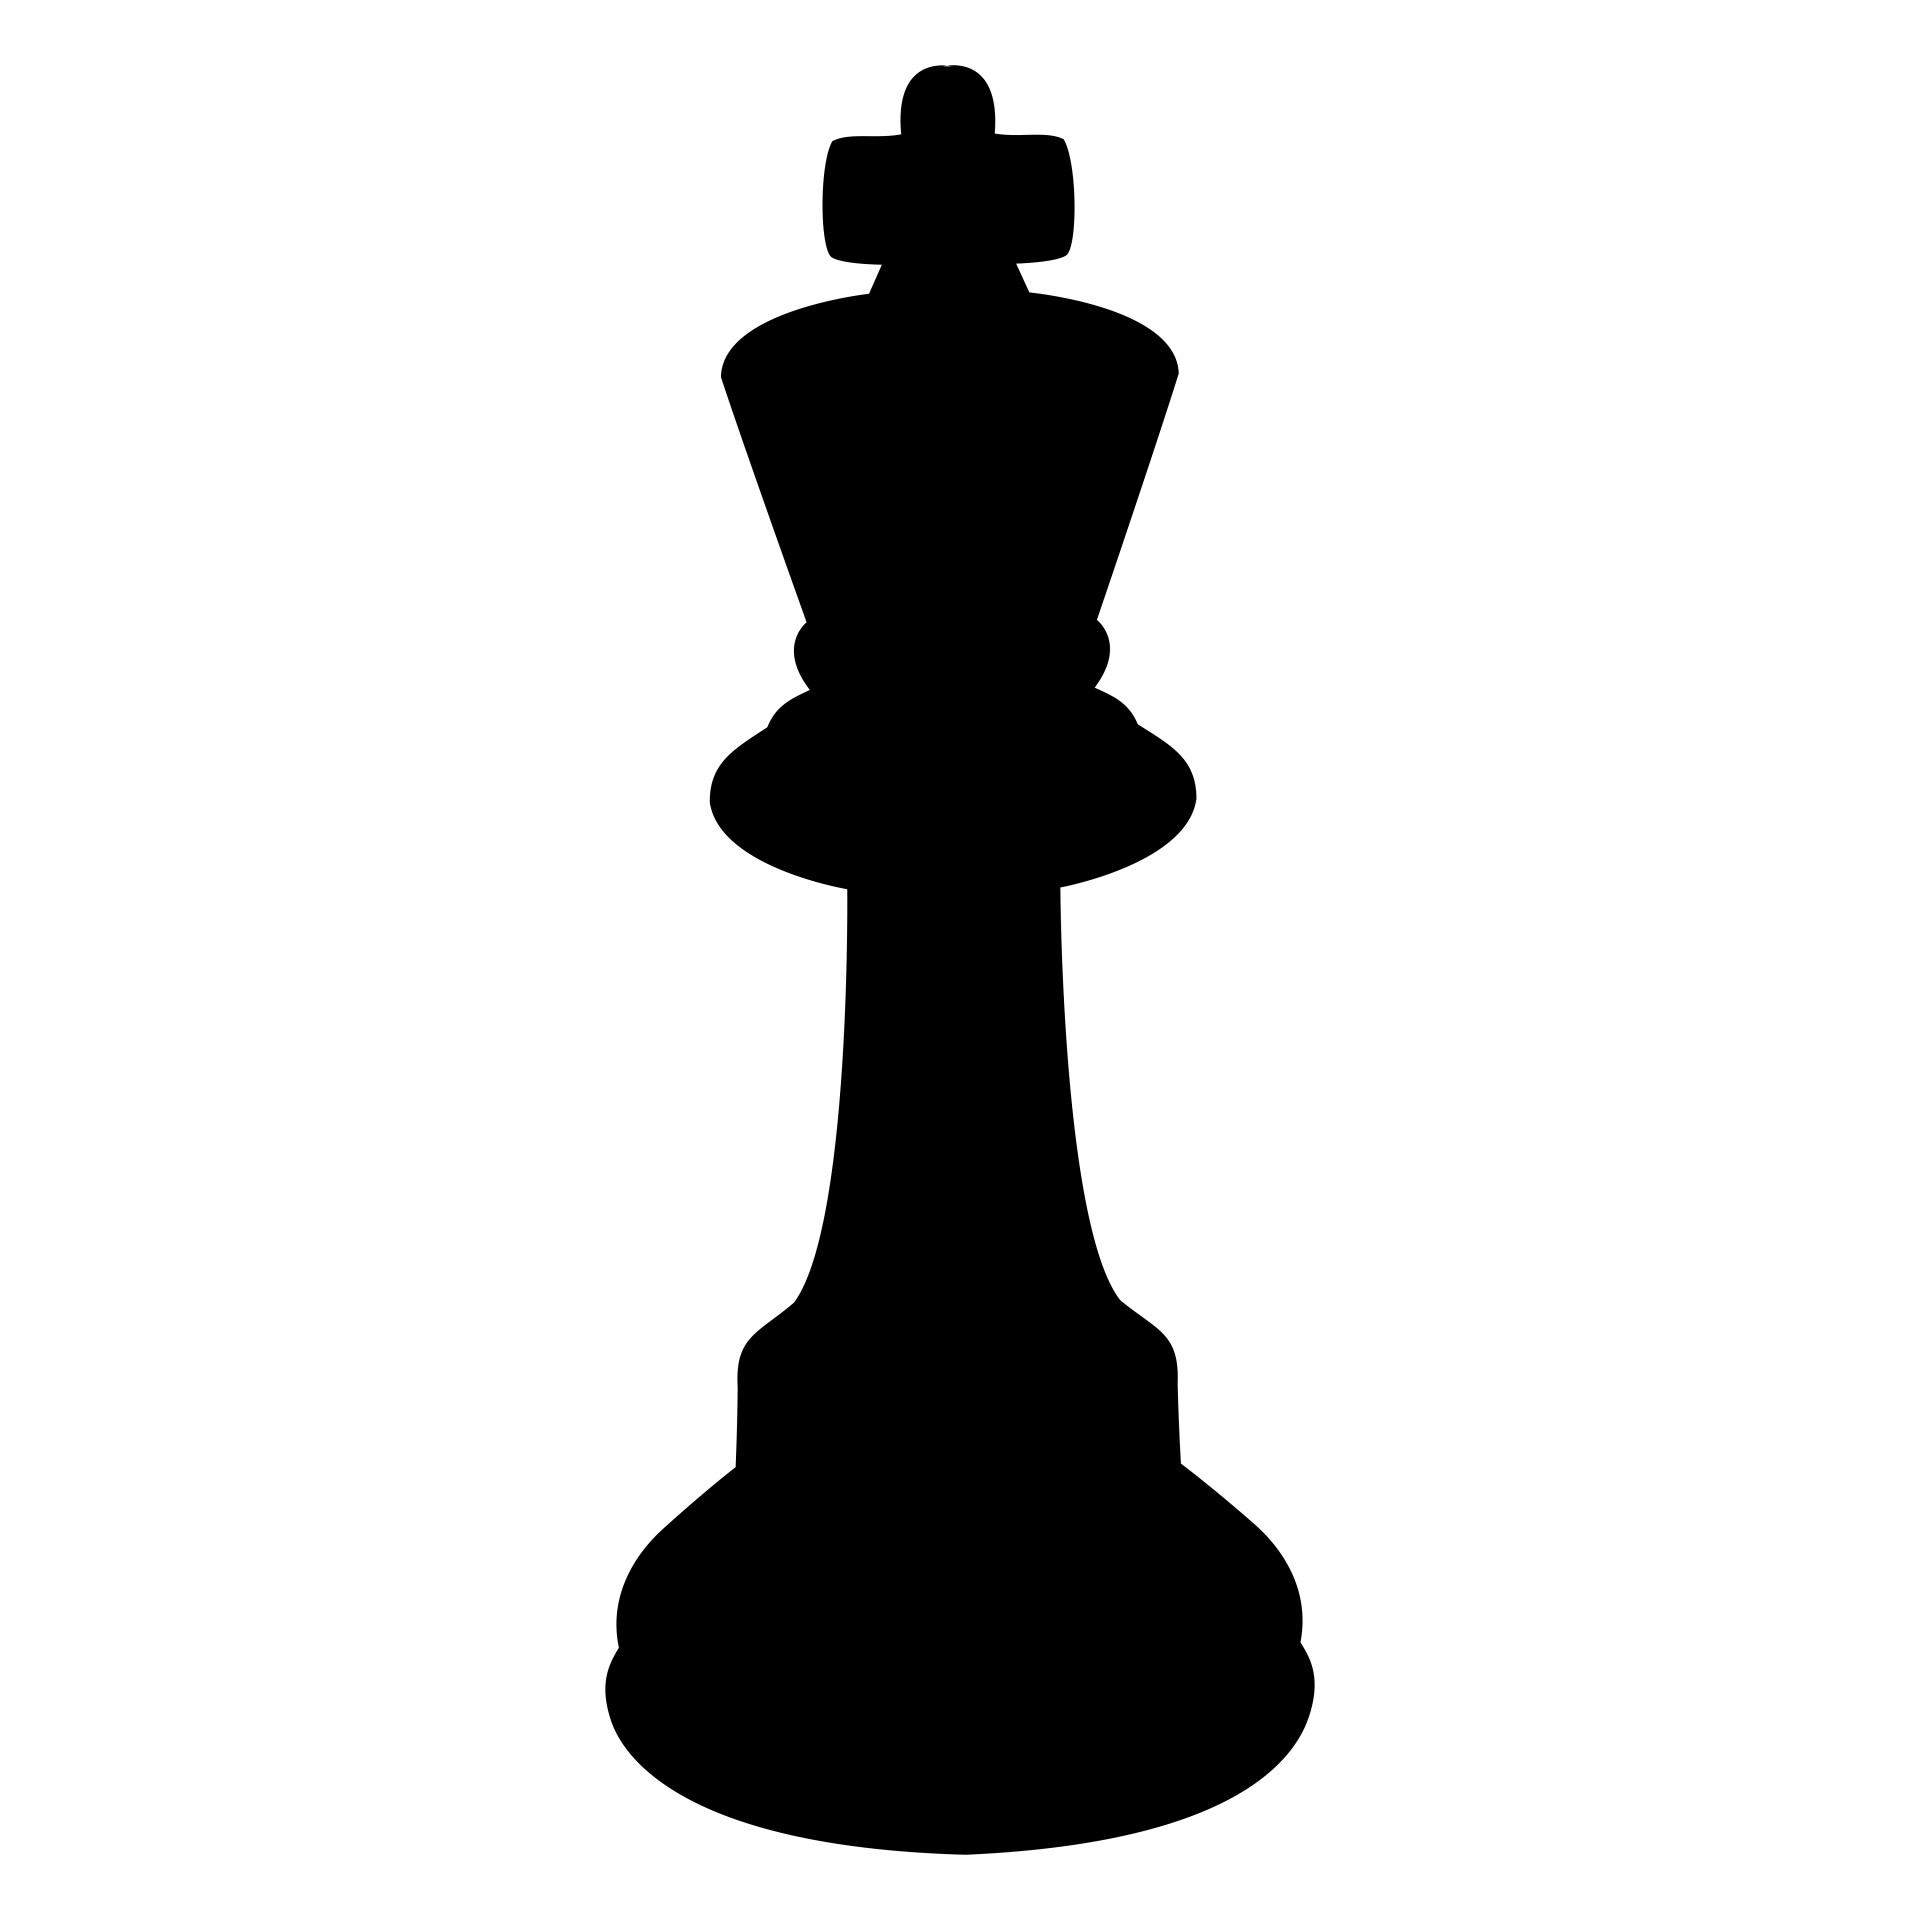 King free stock photo. Chess clipart chess team